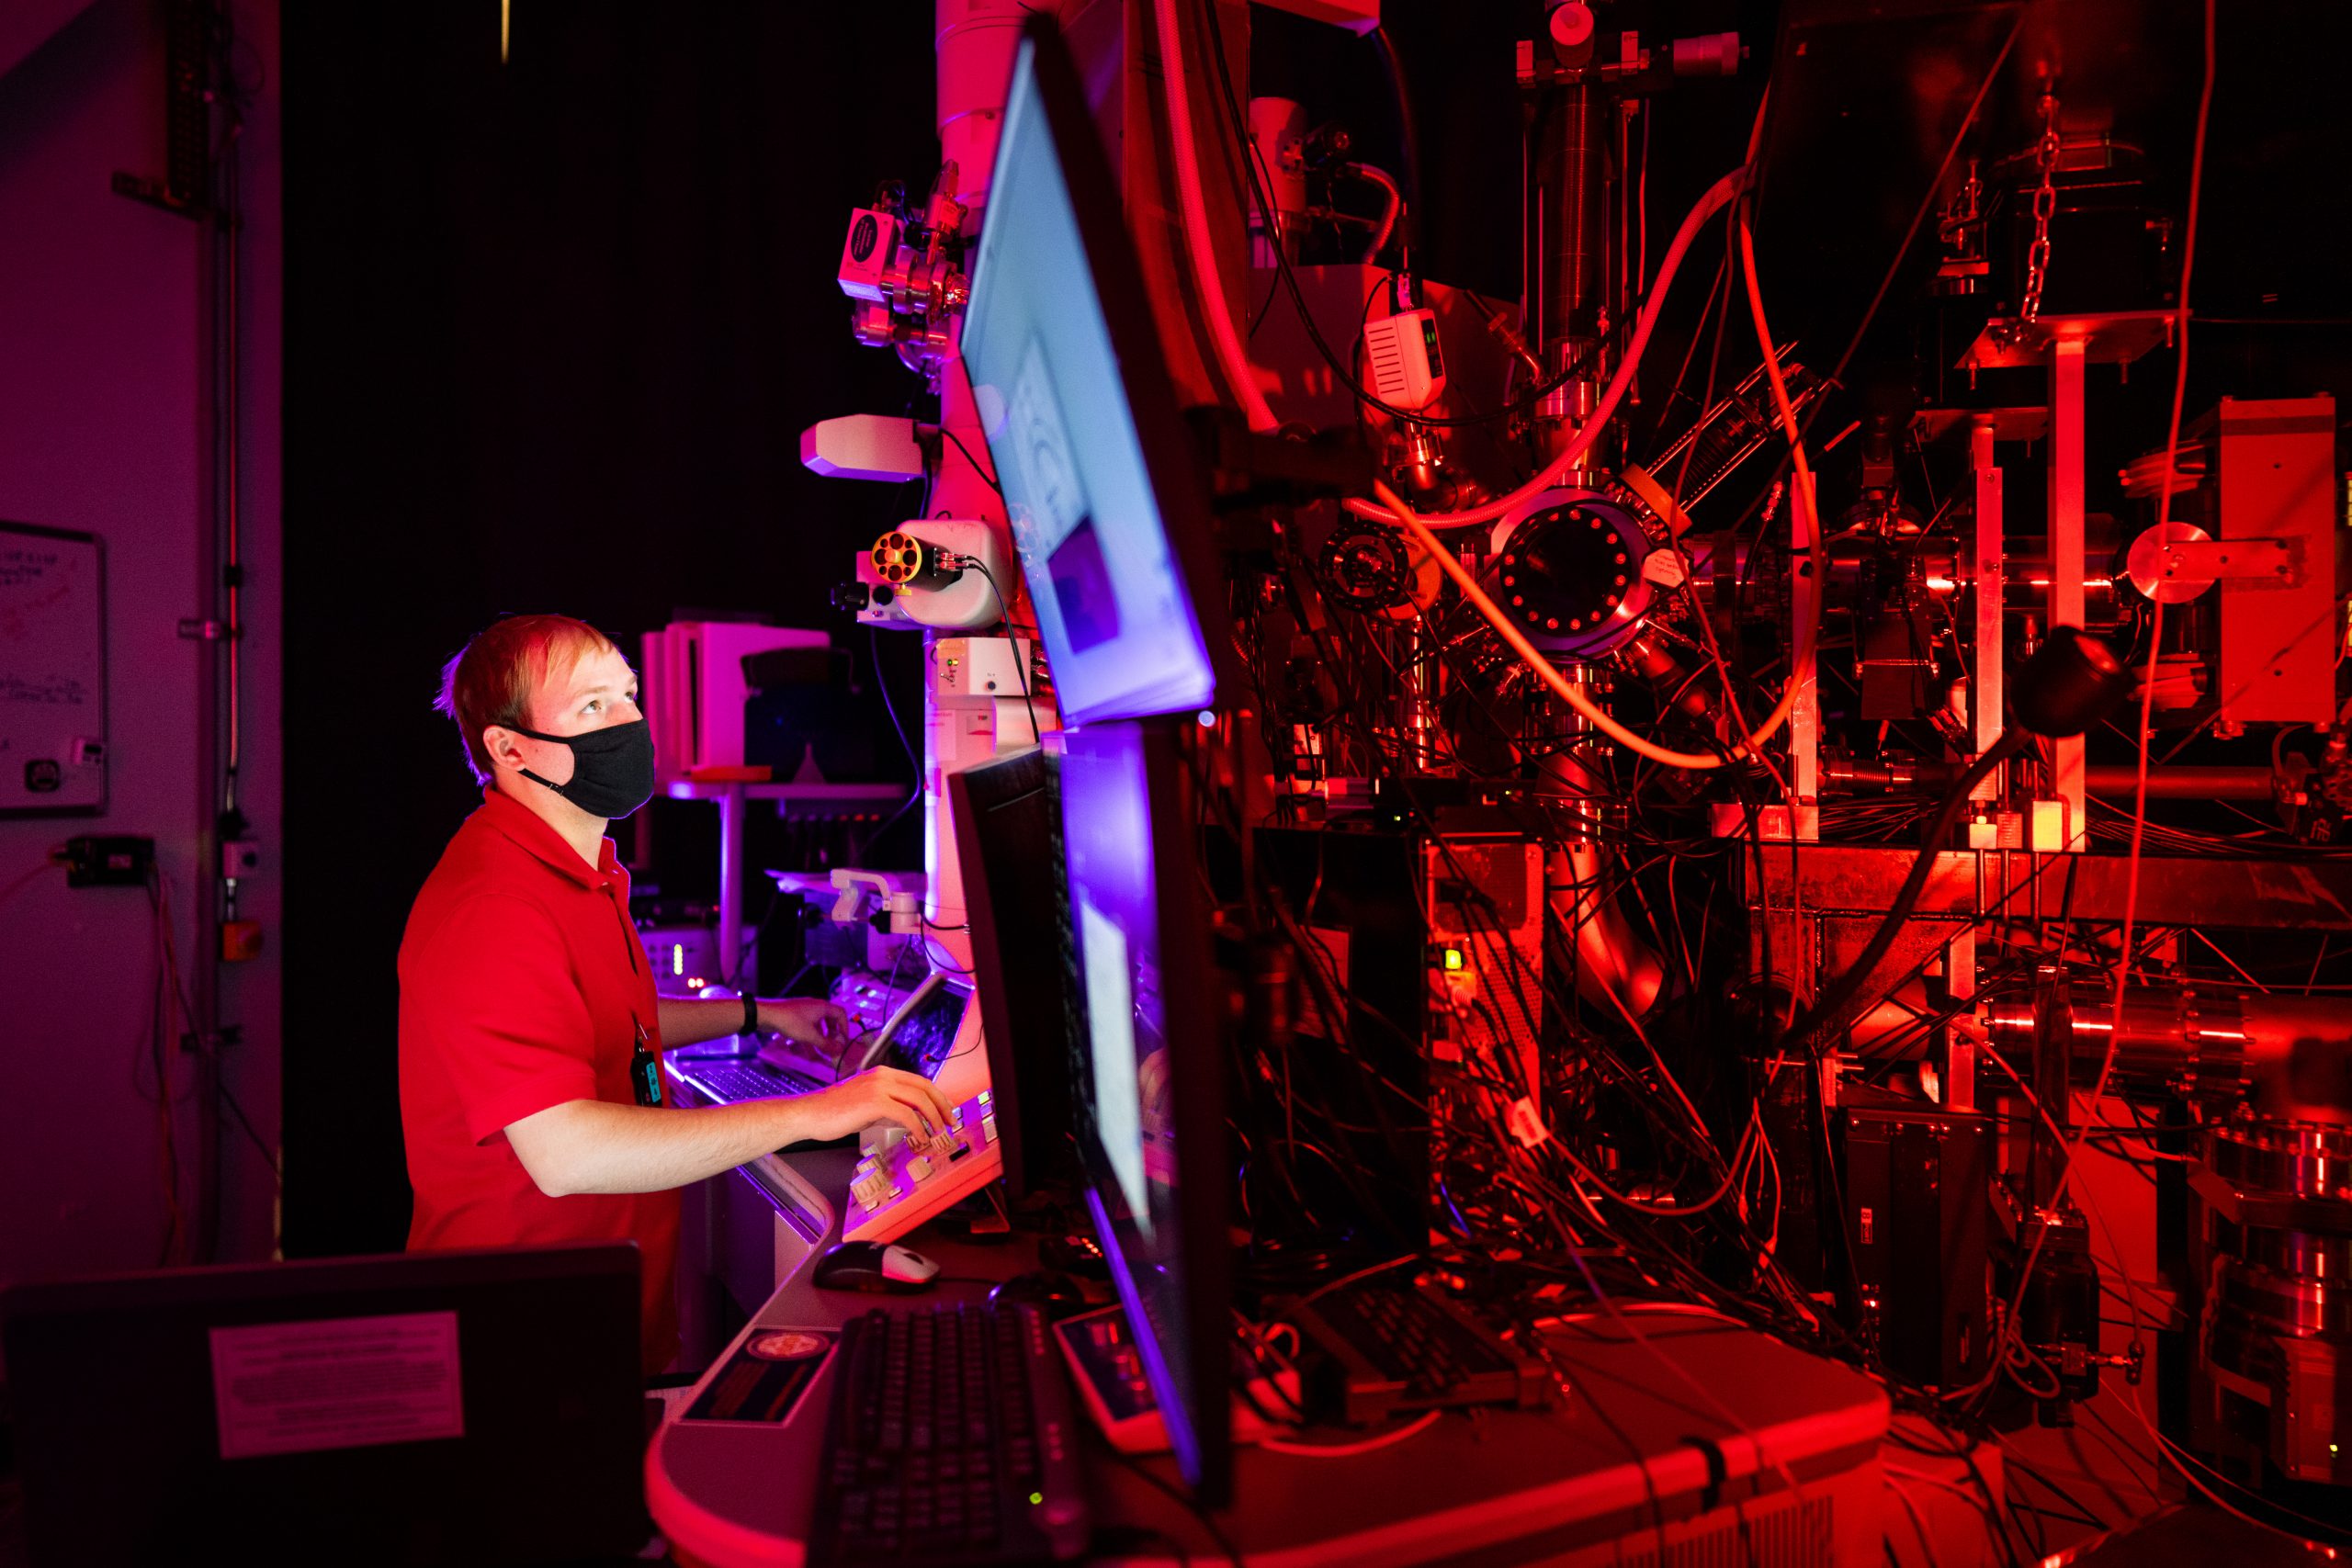 A researcher examines data on a large screen while standing among laboratory equipment lit with red light.